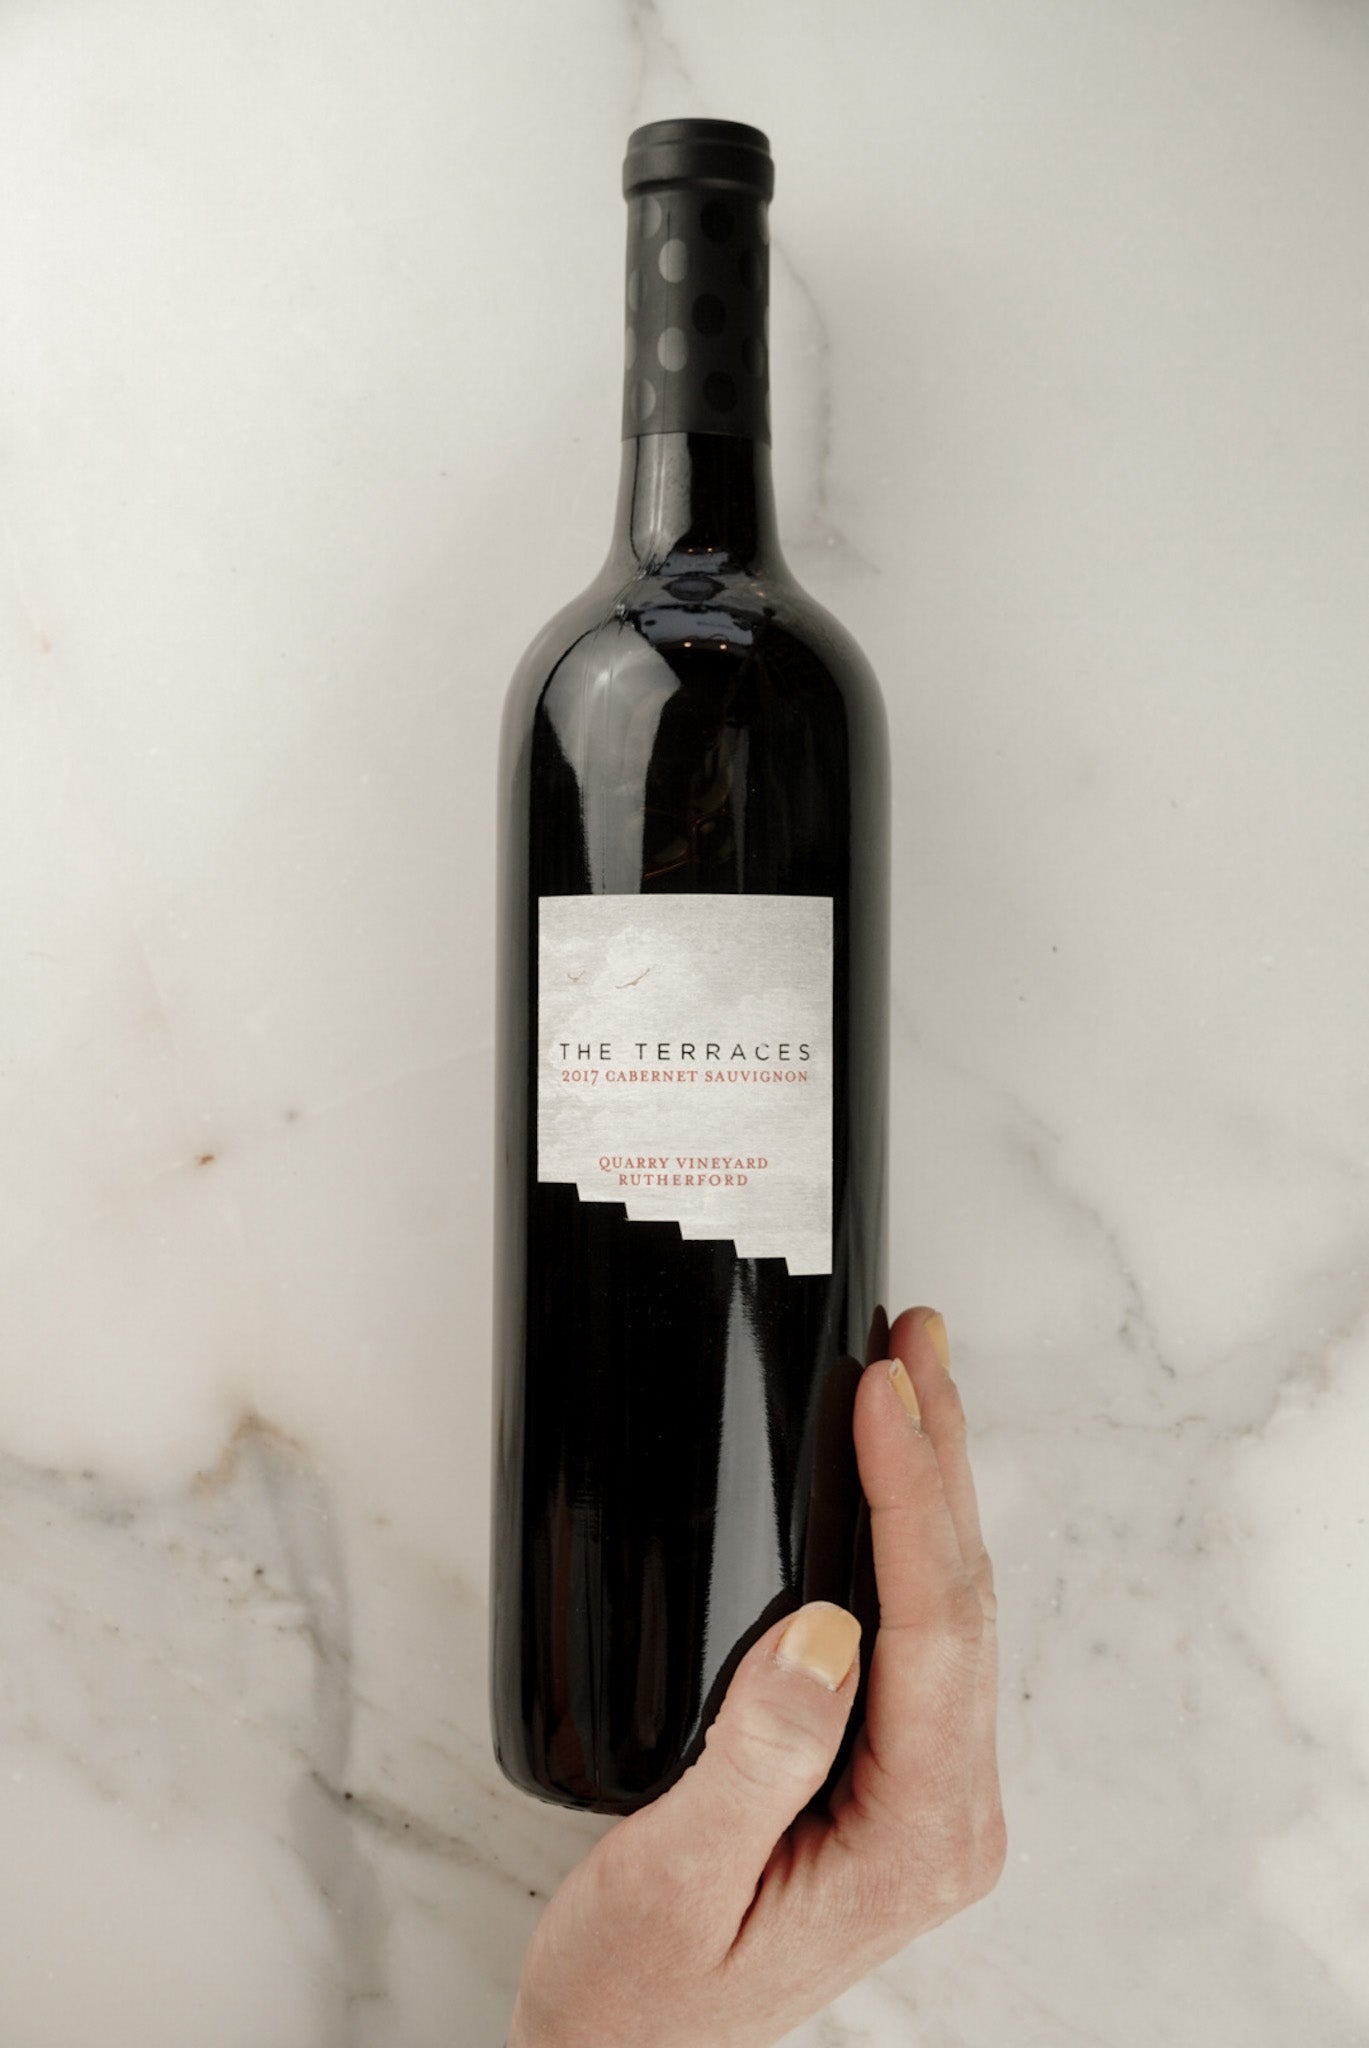 The Terraces "Rutherford" Cabernet Sauvignon (2017)